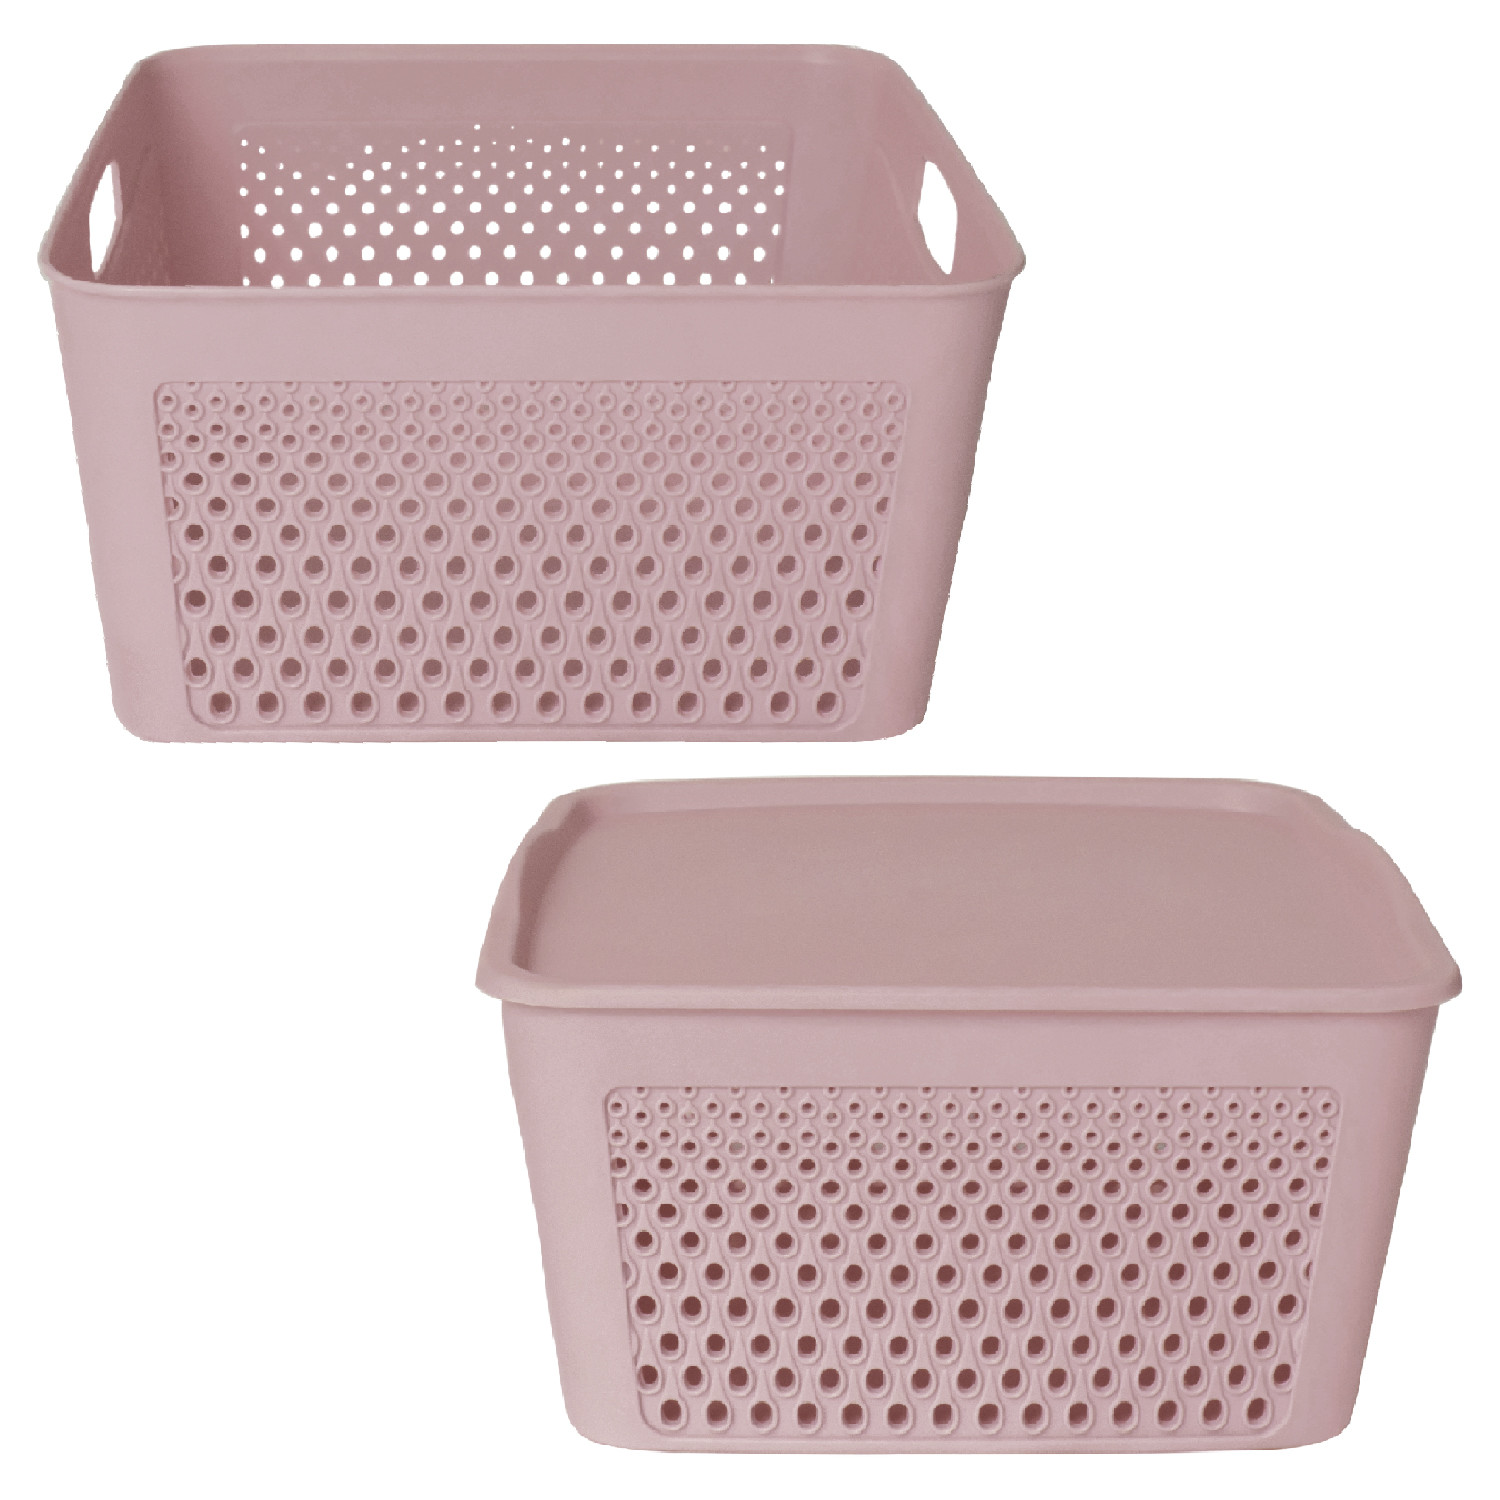 Kuber Industries Netted Design Unbreakable Multipurpose Square Shape Plastic Storage Baskets with lid Large (Grey)